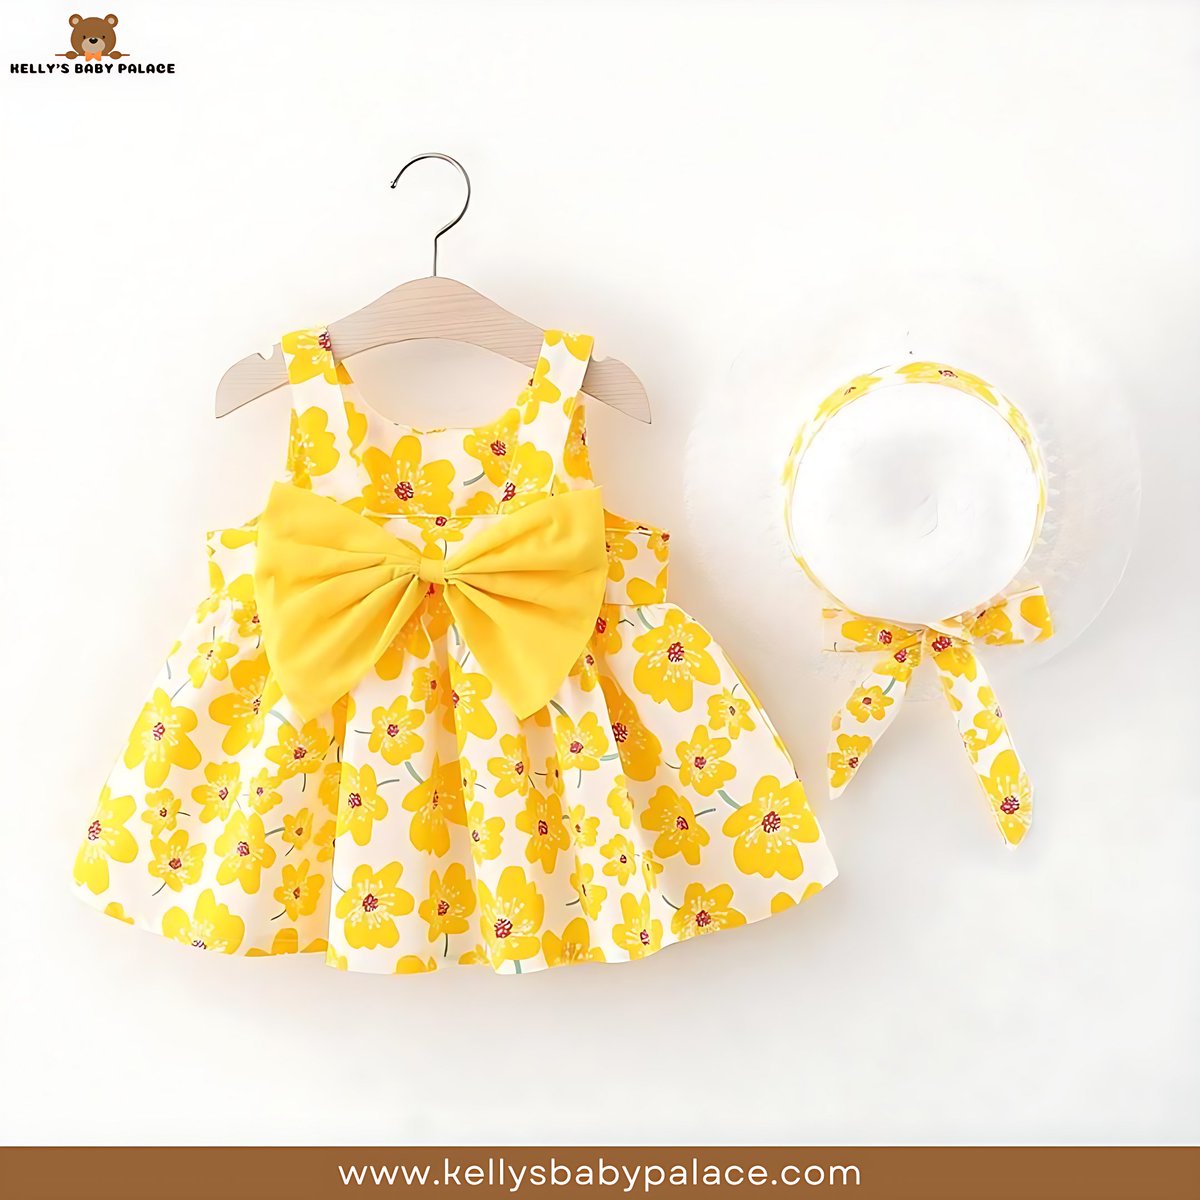 Our adorable outfits are perfect for your princess. Shop now and create lasting memories with your little angel! 
Available here: bit.ly/42PFDu9

#babygirlclothing #babyclothing #babygirlstyle #babygirlfashion #babyfashion #babygirlmodel #baby #babystyle #babygirl